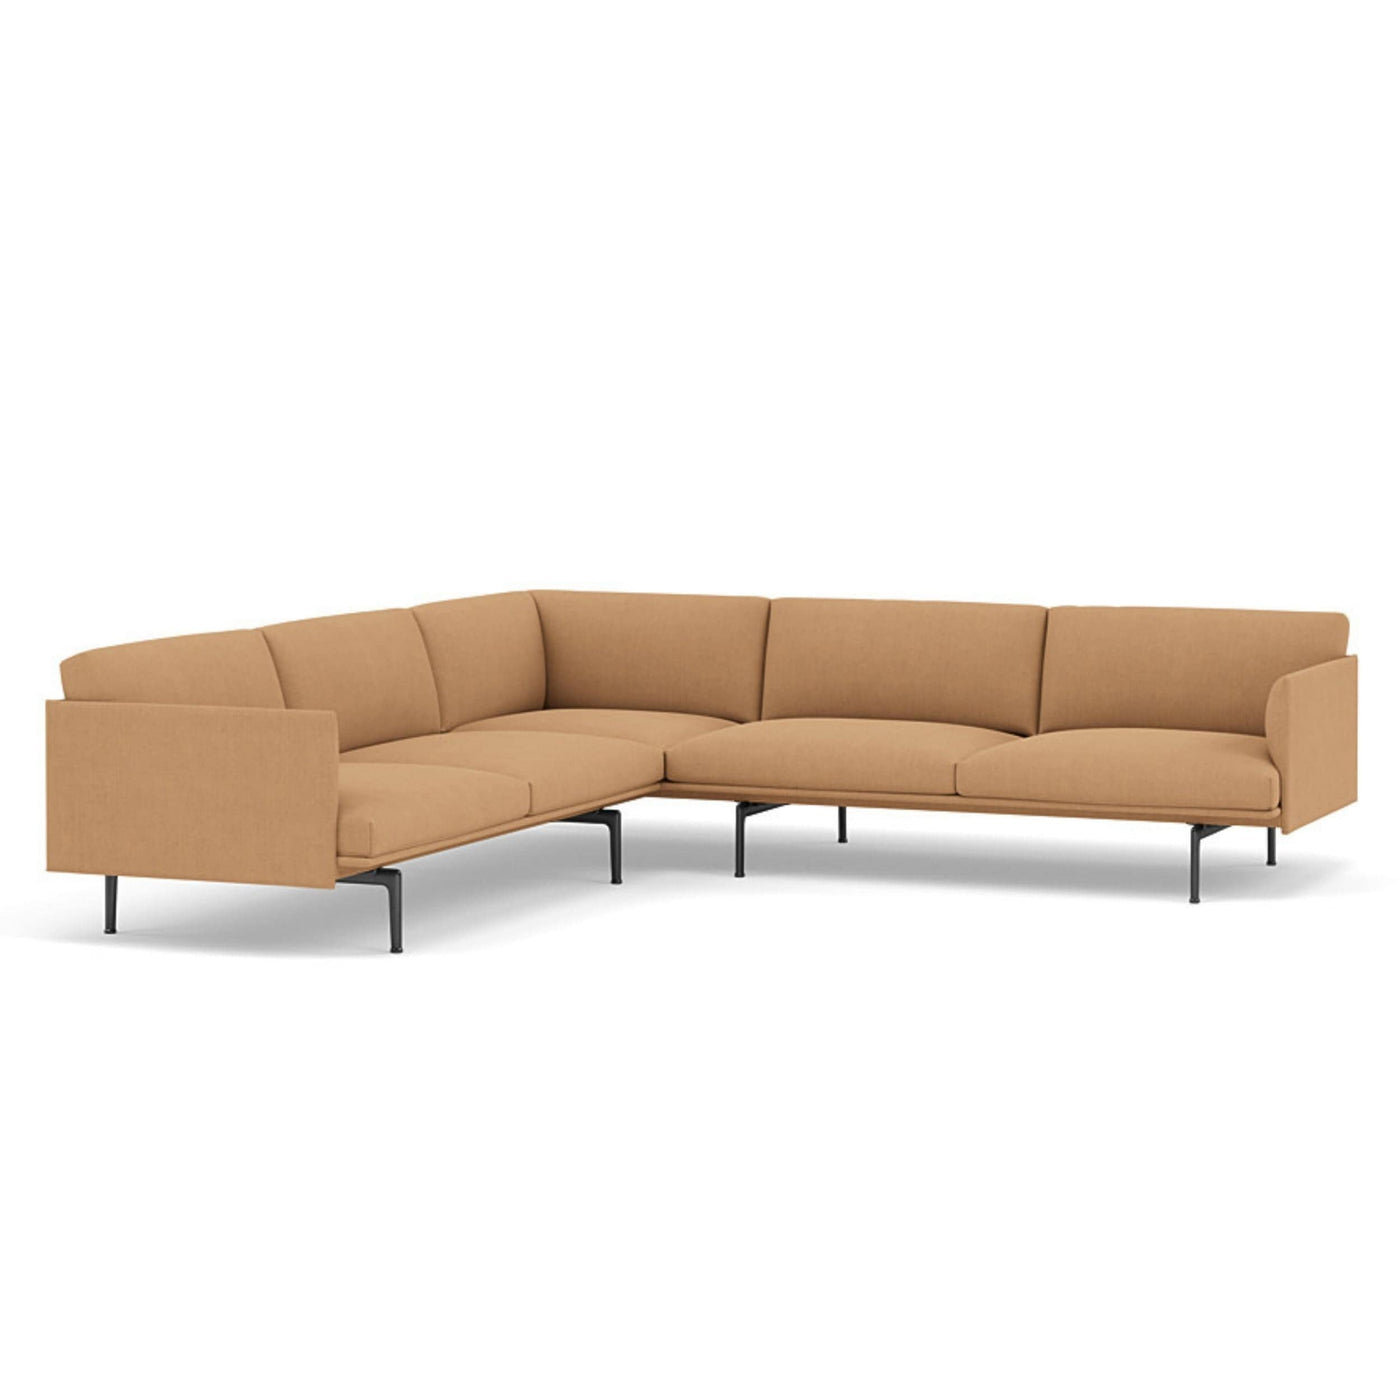 muuto outline corner sofa in fiord 451 and black legs. Made to order from someday designs. #colour_fiord-451